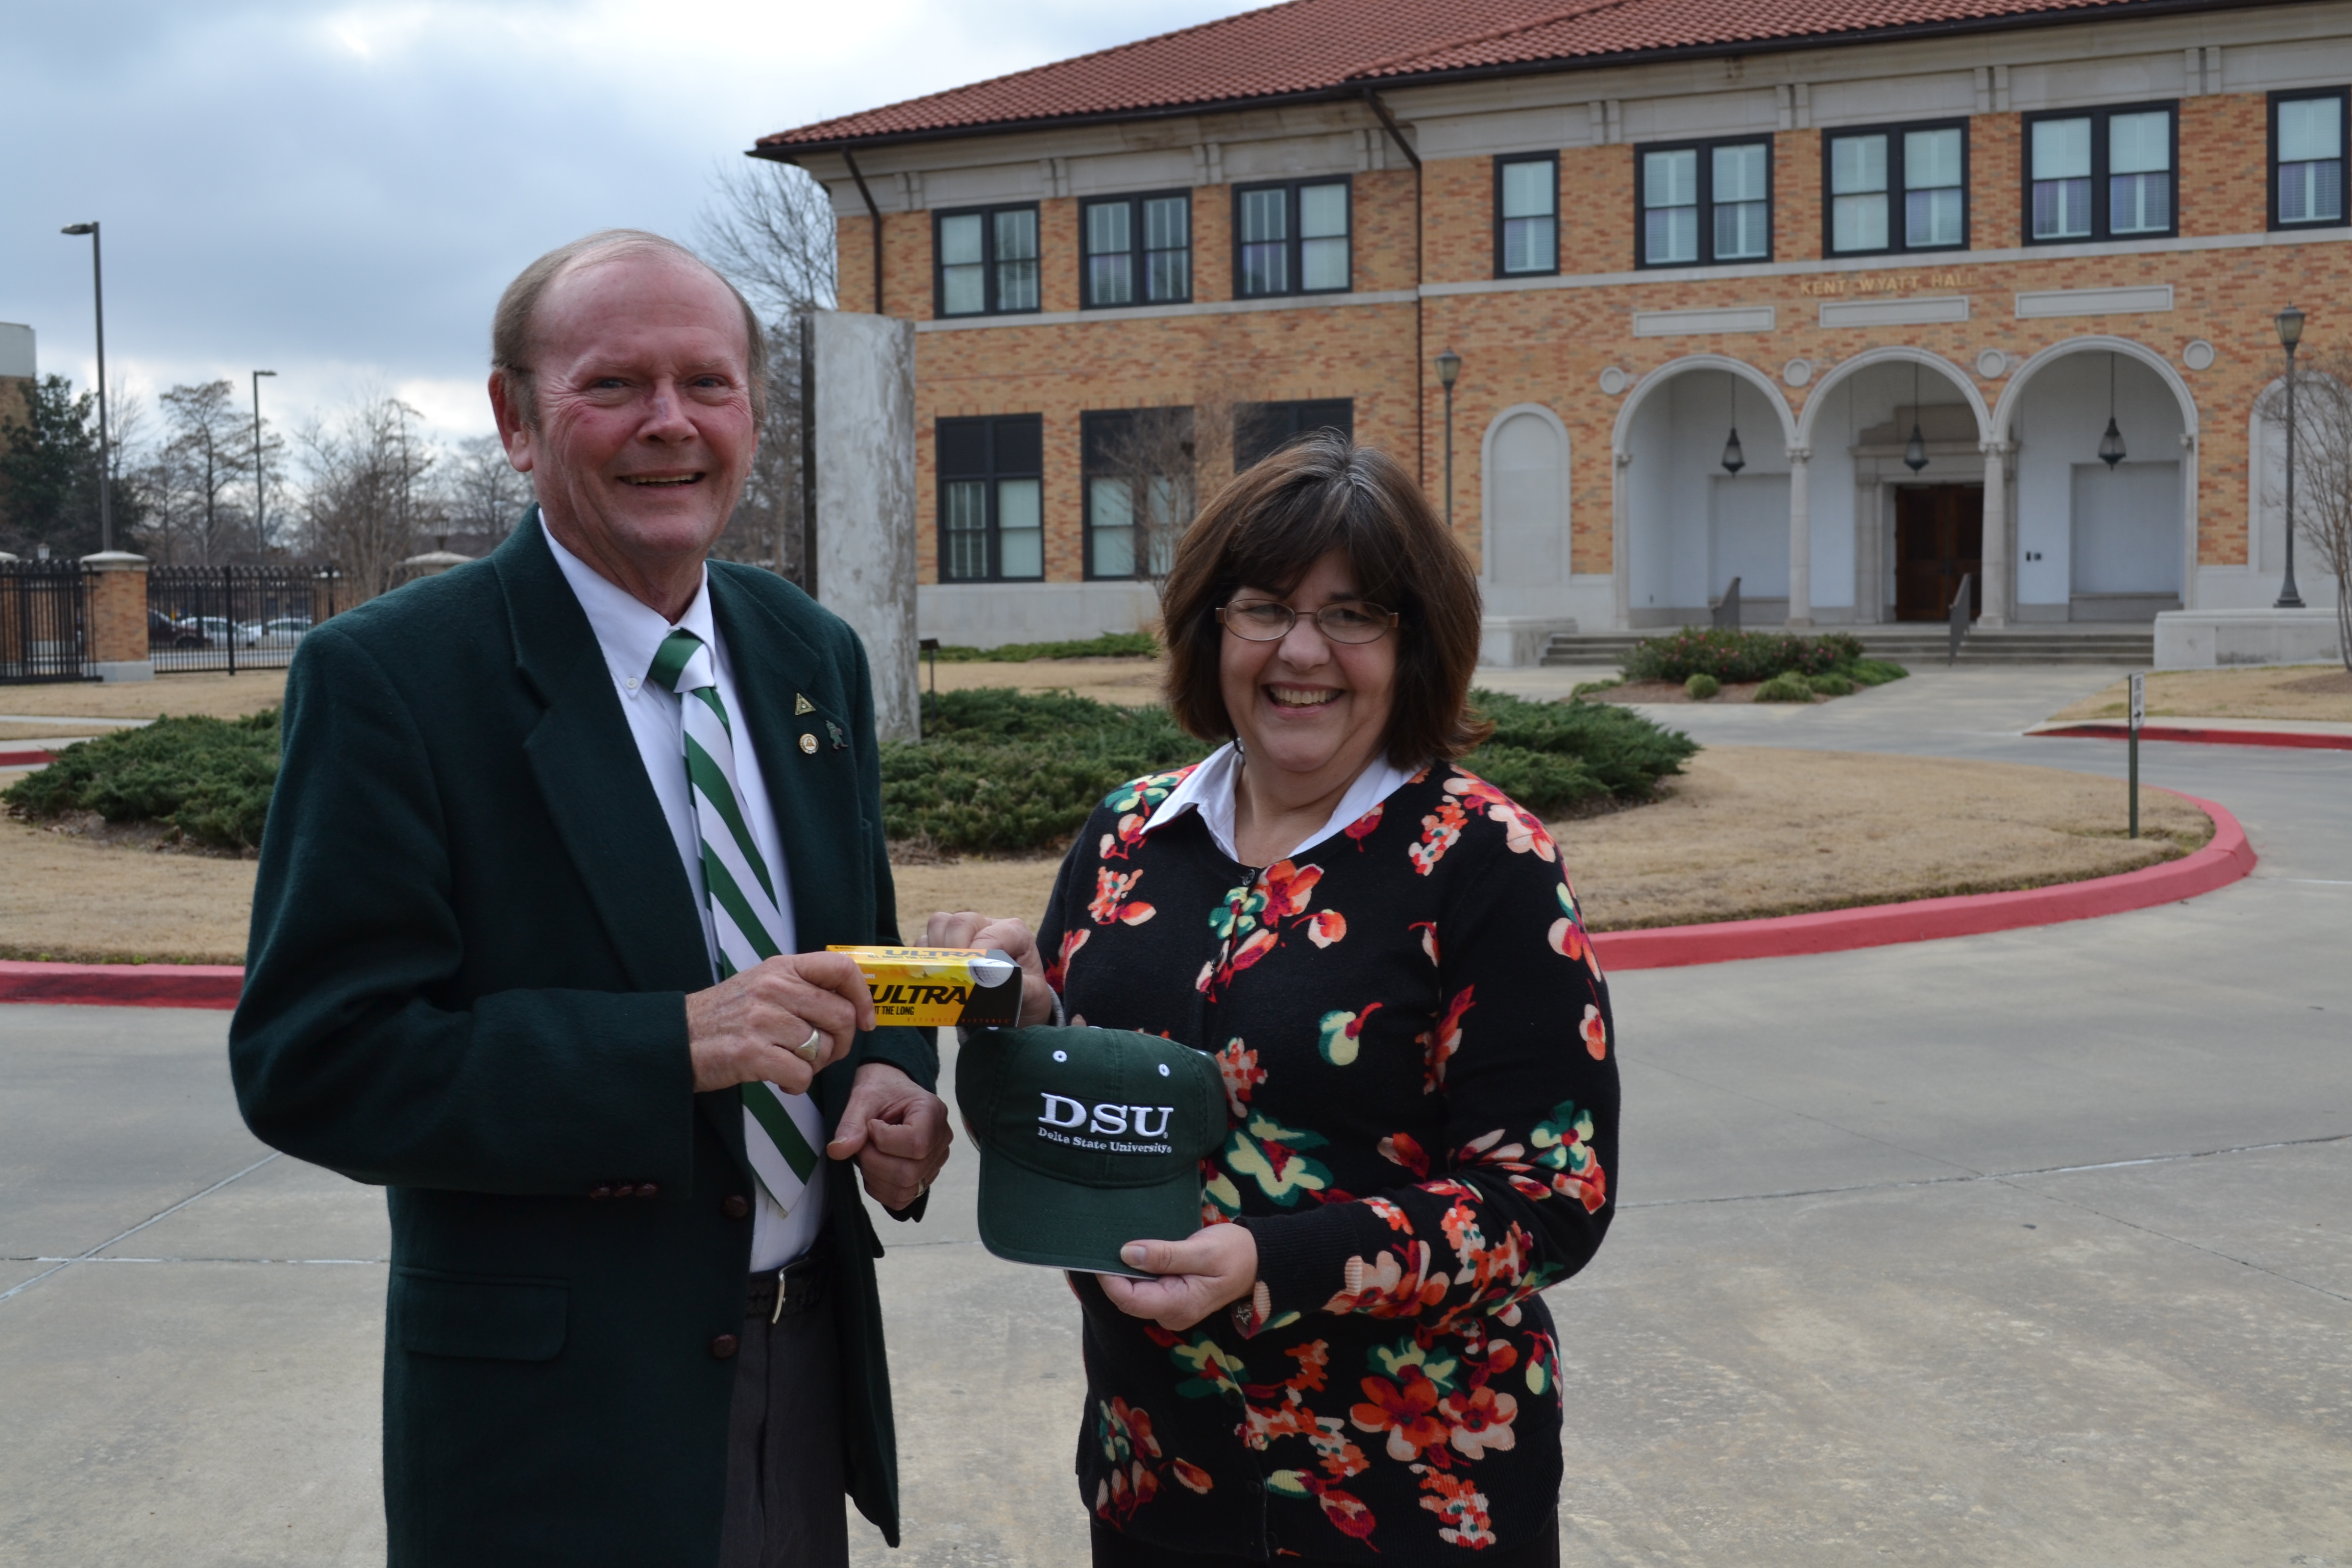 Photo: Anne Wynn Weissinger, President of the Delta State University Foundation Board of Directors, presents Delta Regional Foundation Board member, James Donald Cooper, with a Delta State University cap and logo golf balls in appreciation of grants from Delta Regional Foundation totaling $72,000 over the past two years. 